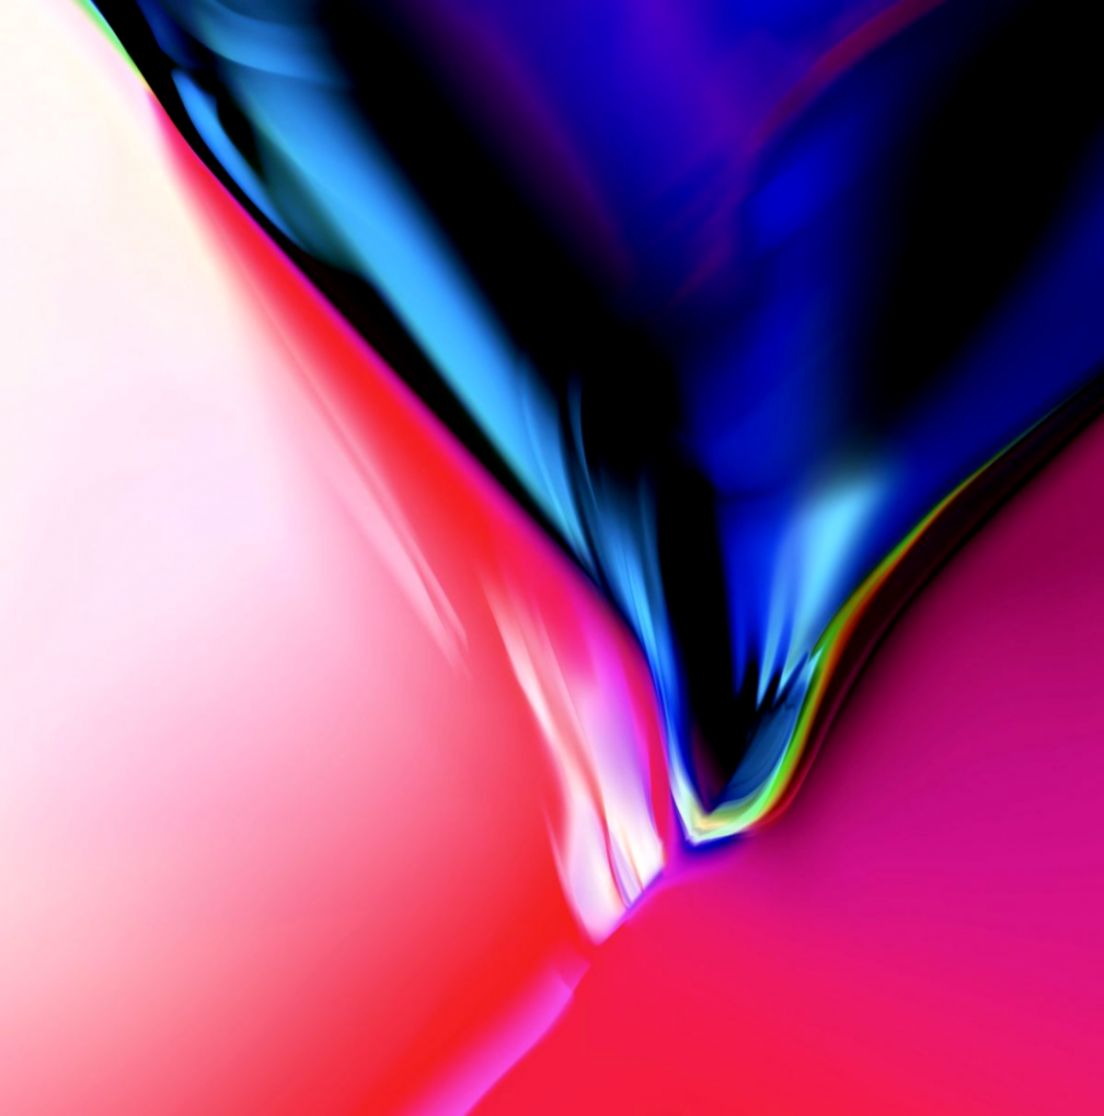 47 Hd Iphone X Wallpapers Updated - Iphone 8 Plus Wallpaper Hd Download , HD Wallpaper & Backgrounds